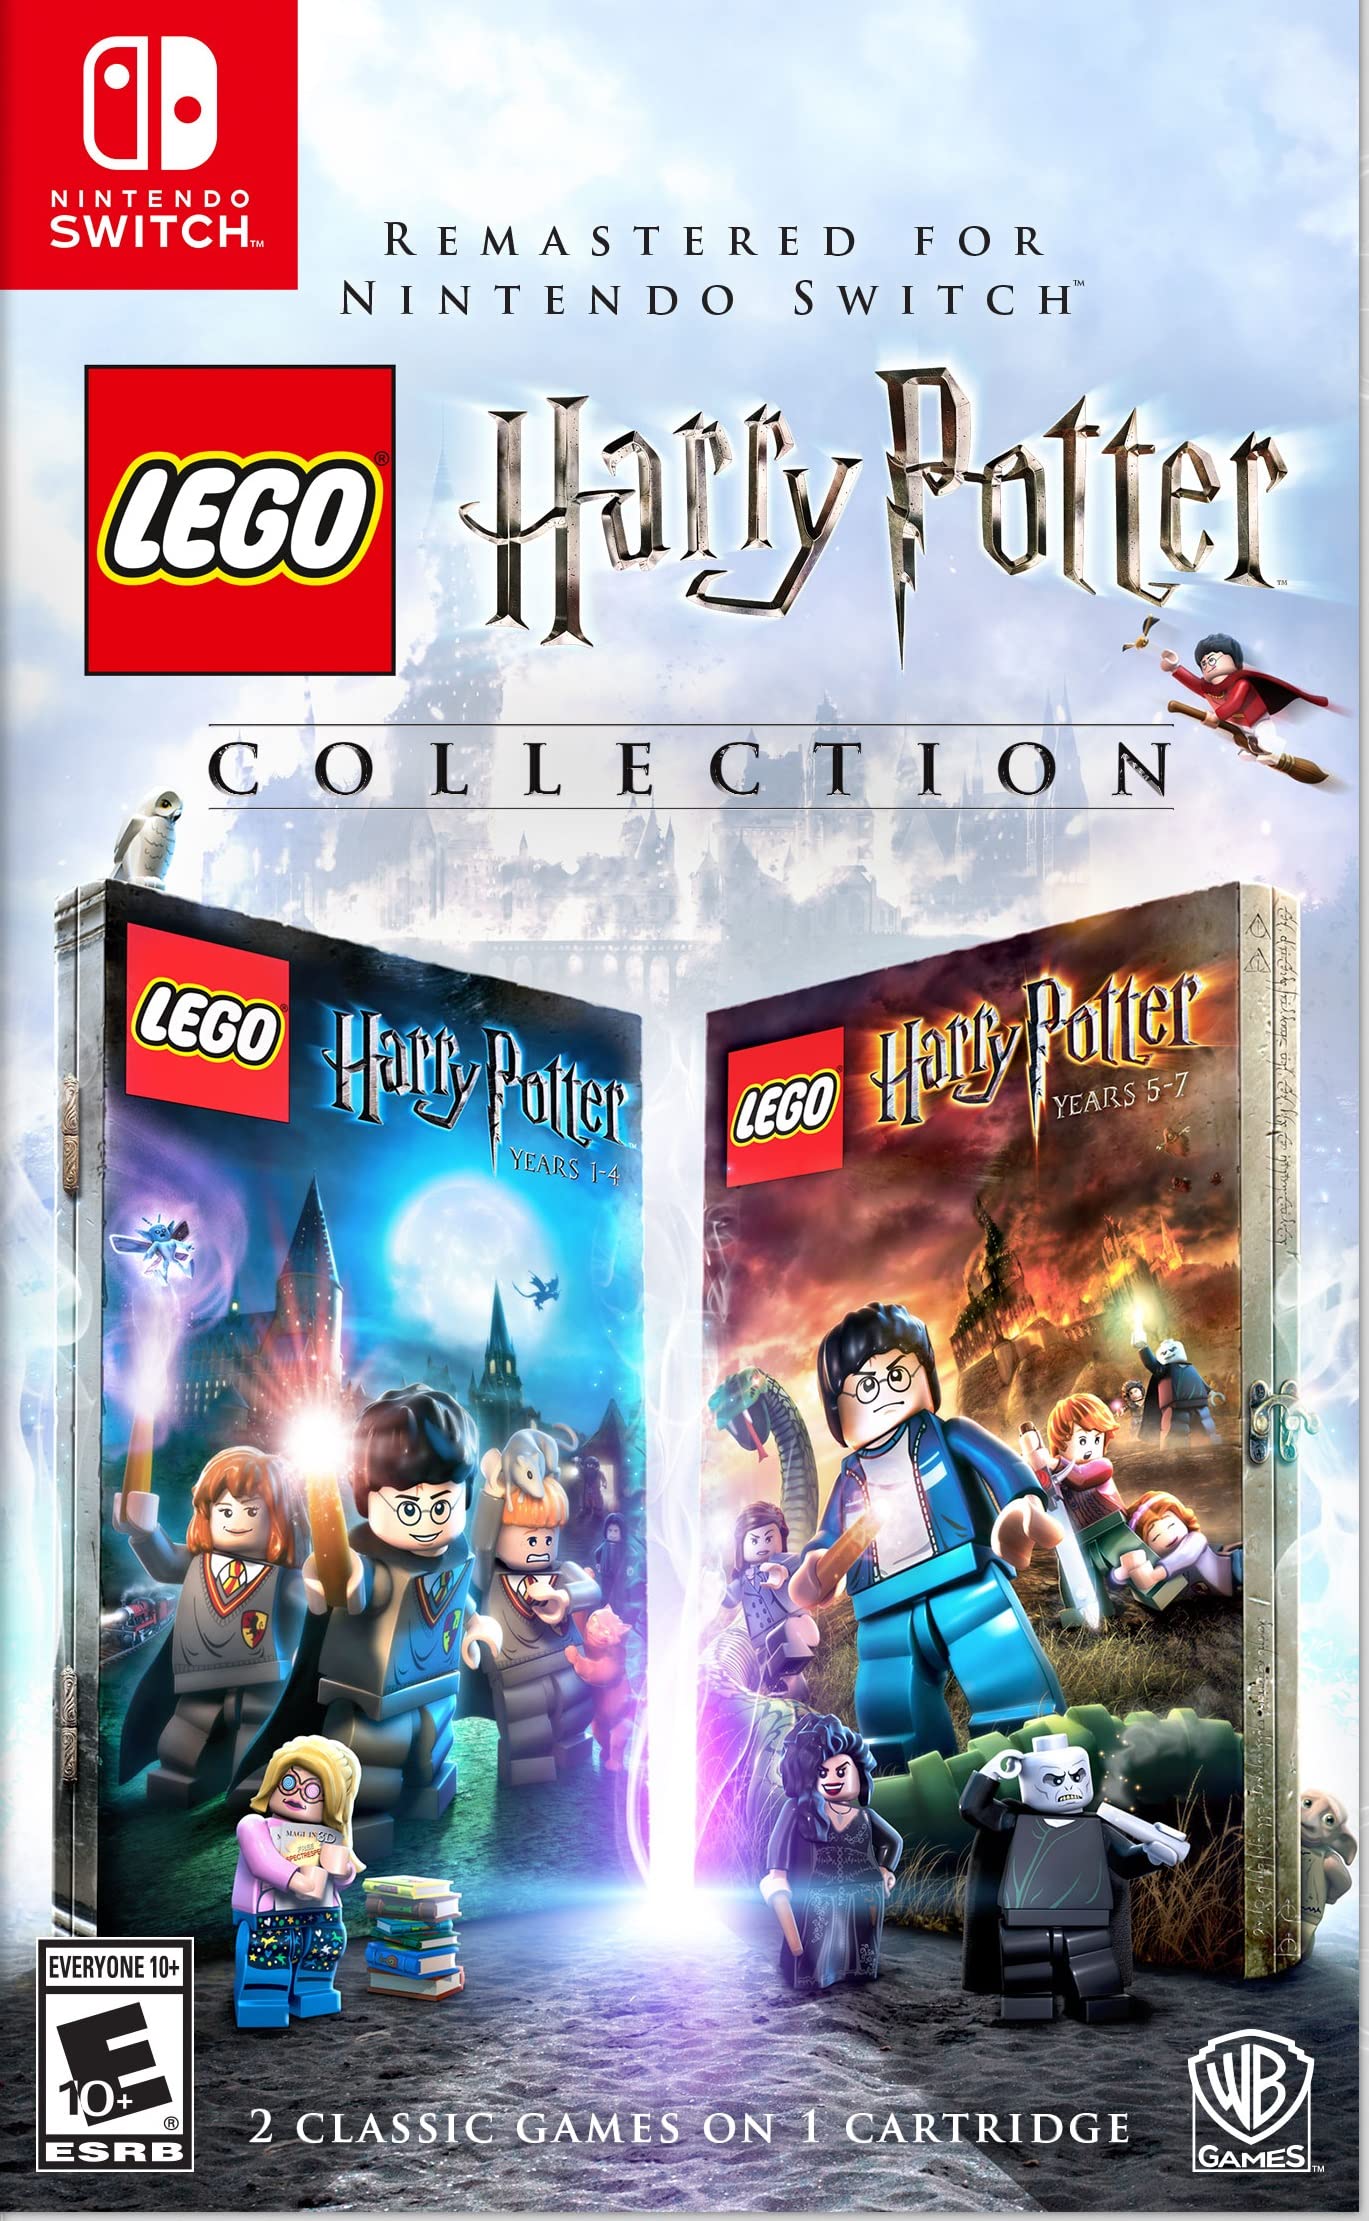 lego-harry-potter-collection-nintendo-switch-game-8-bit-legacy